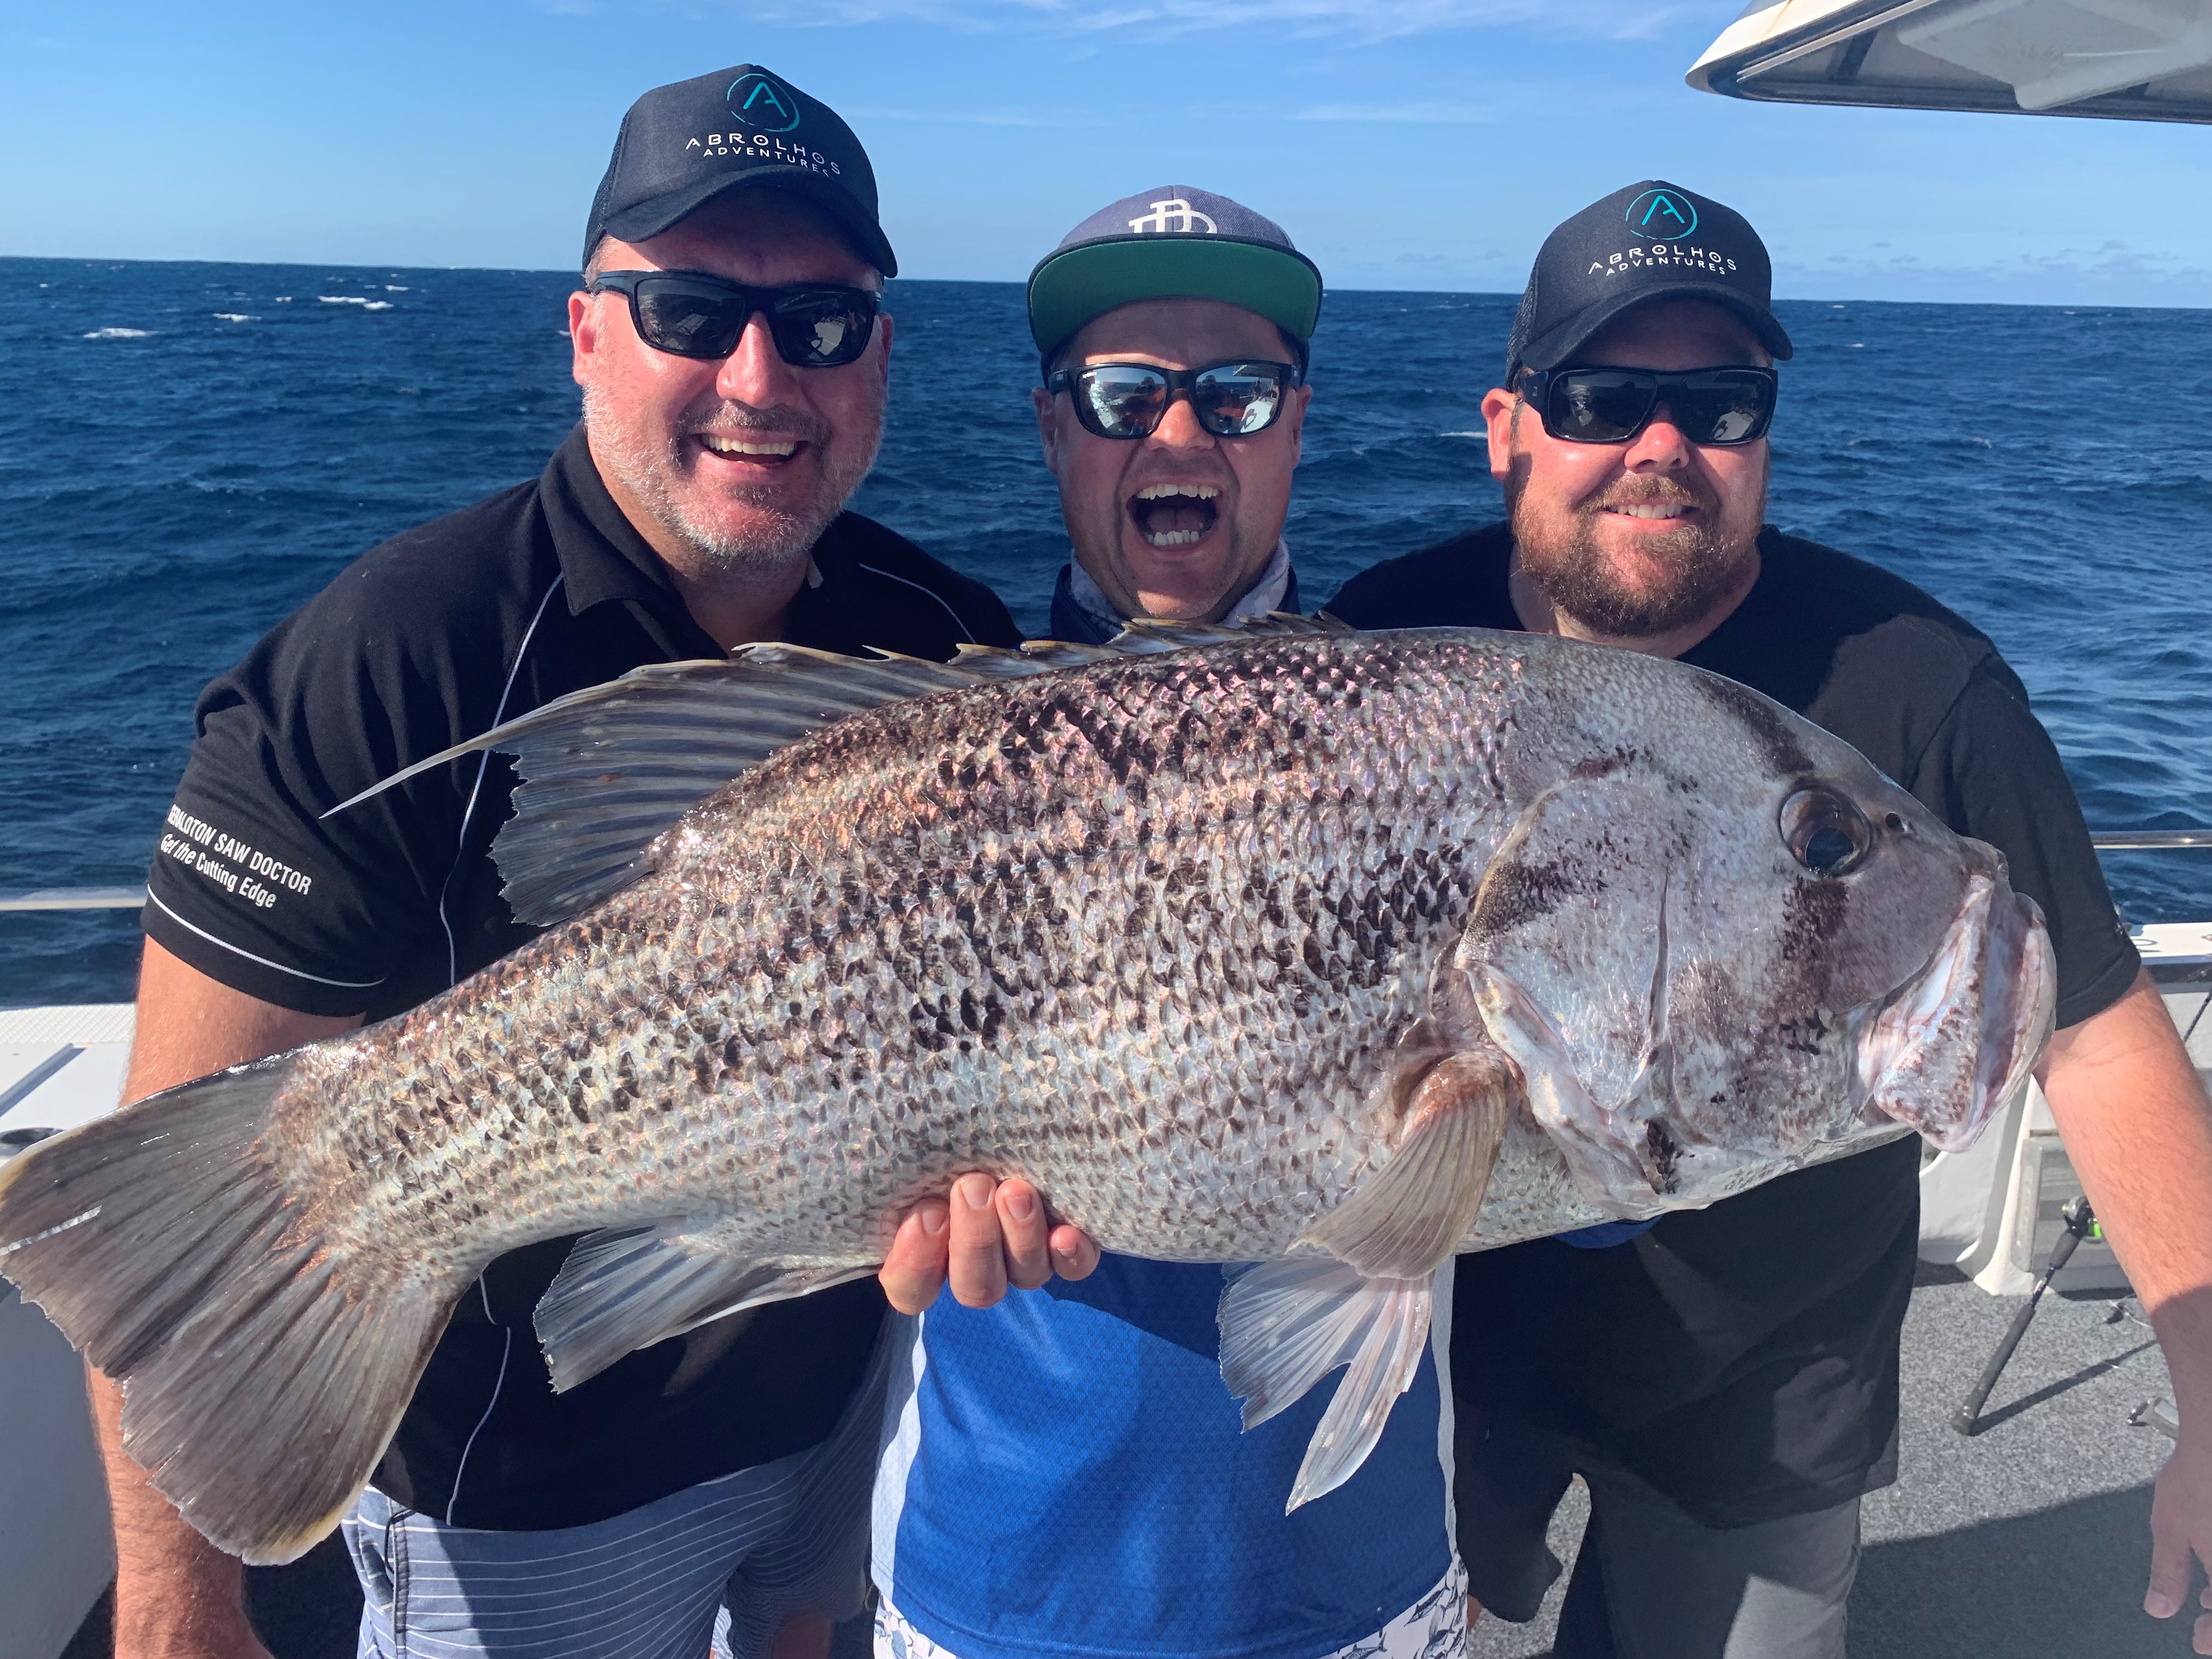 Full Day Fishing Charter - Abrolhos Islands